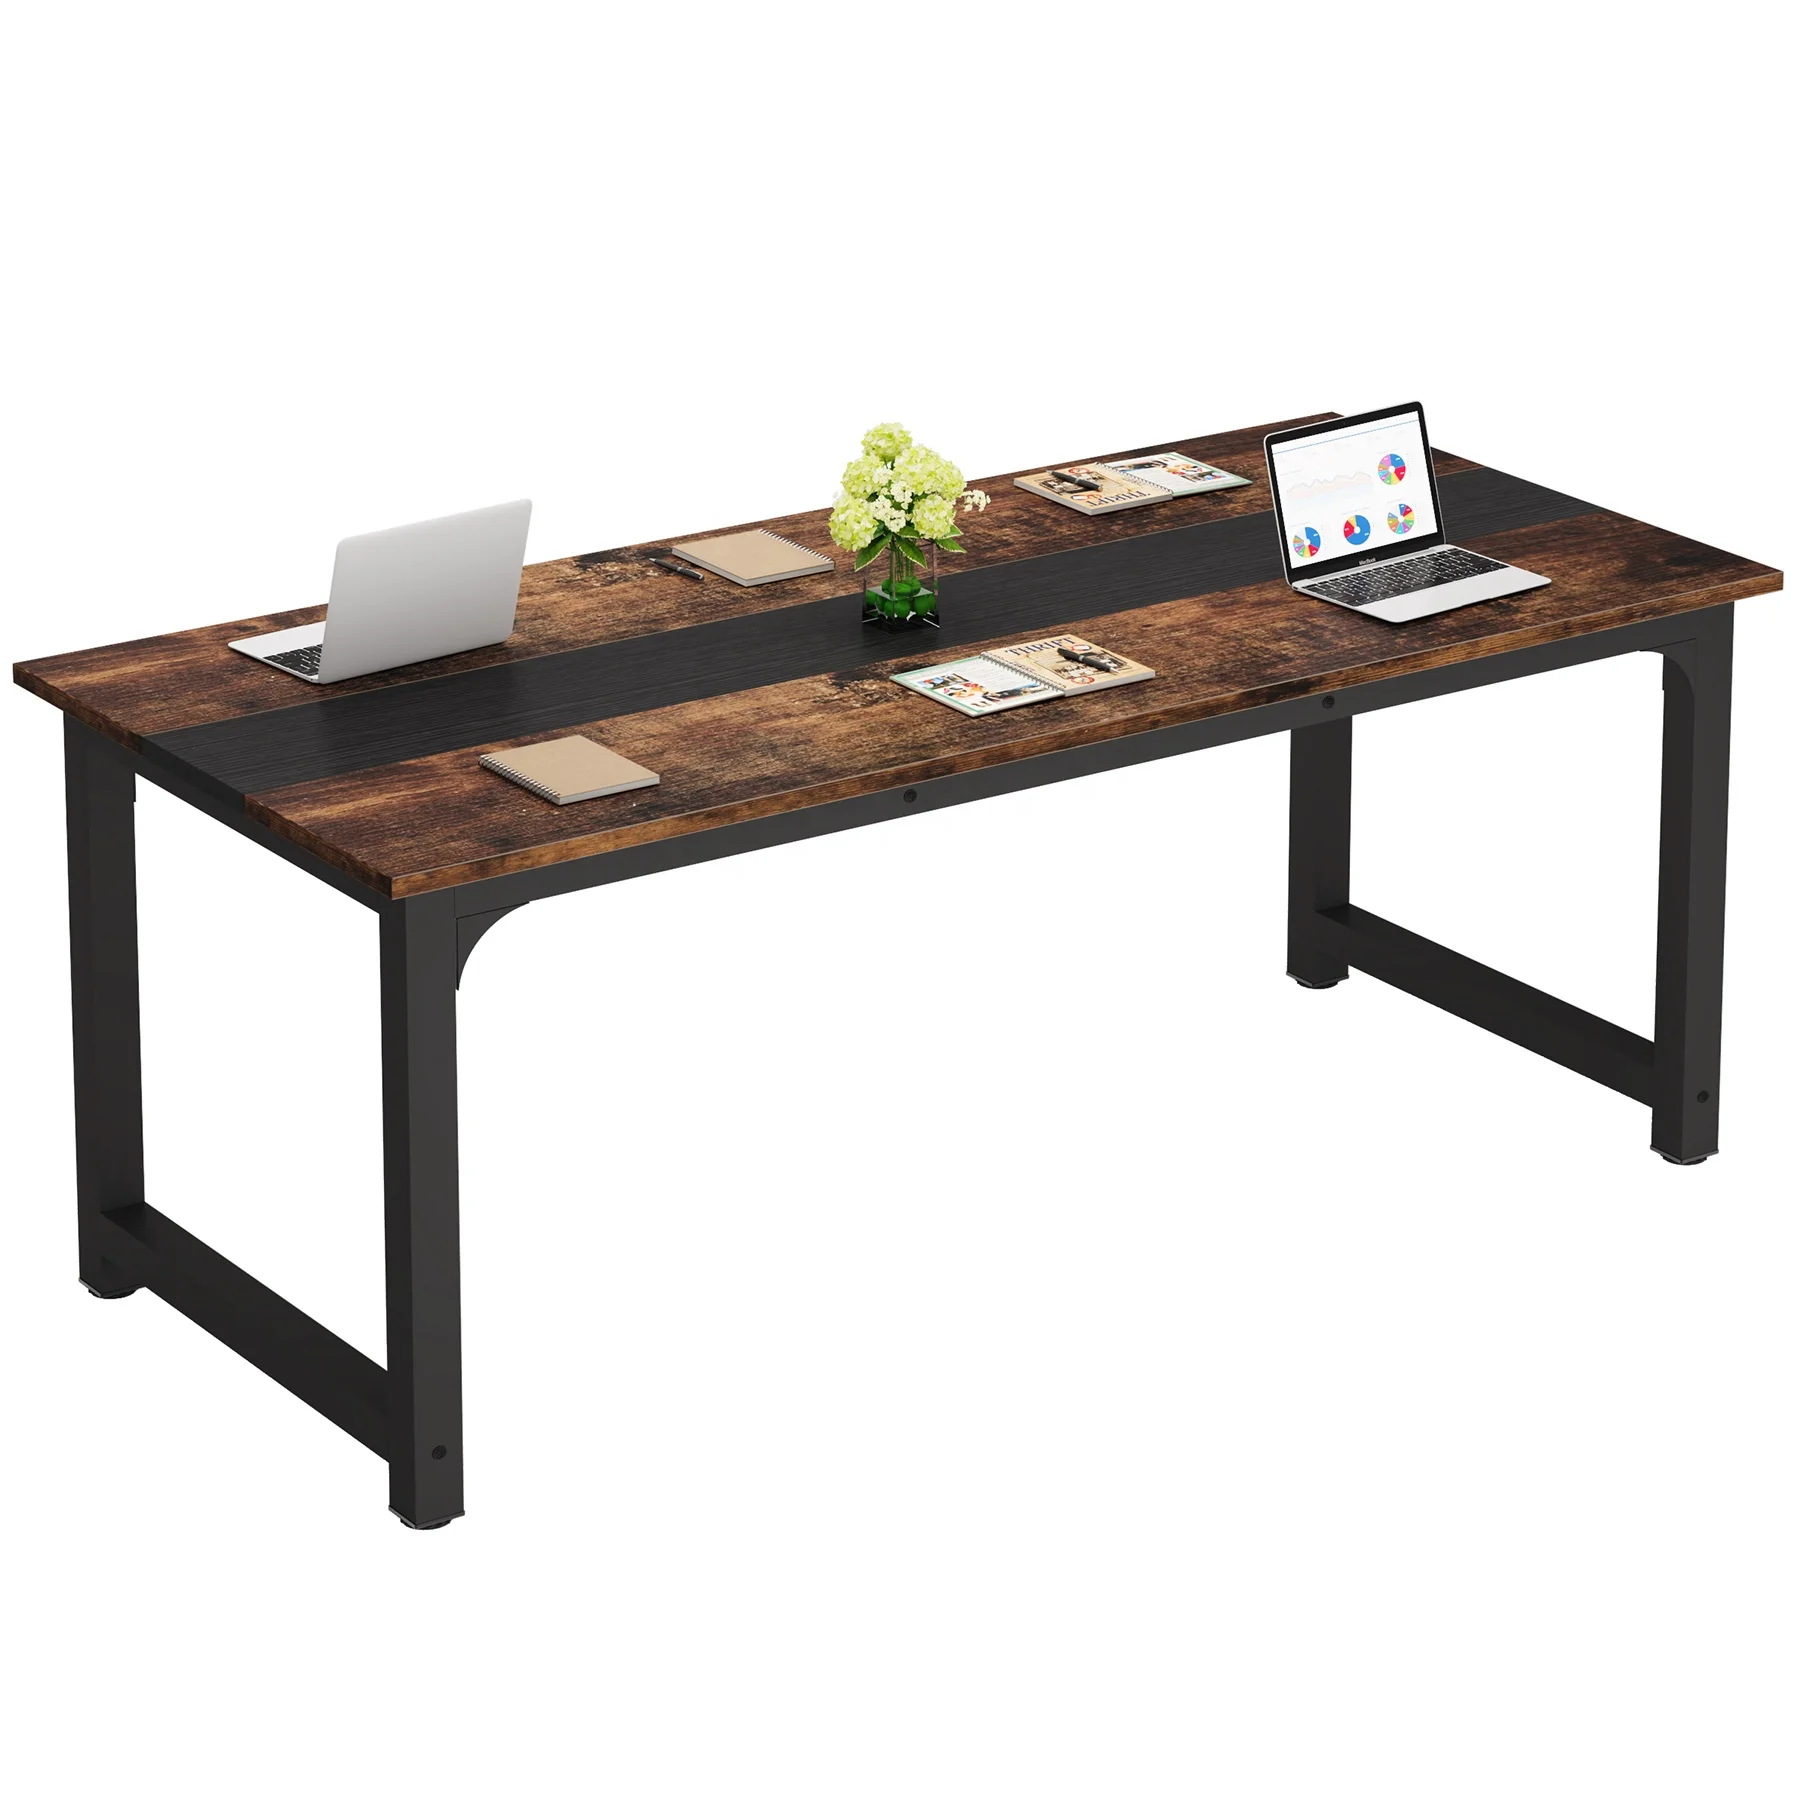 70.9 inch large simple computer desk home office classic executive meeting writing room conference 12 people table